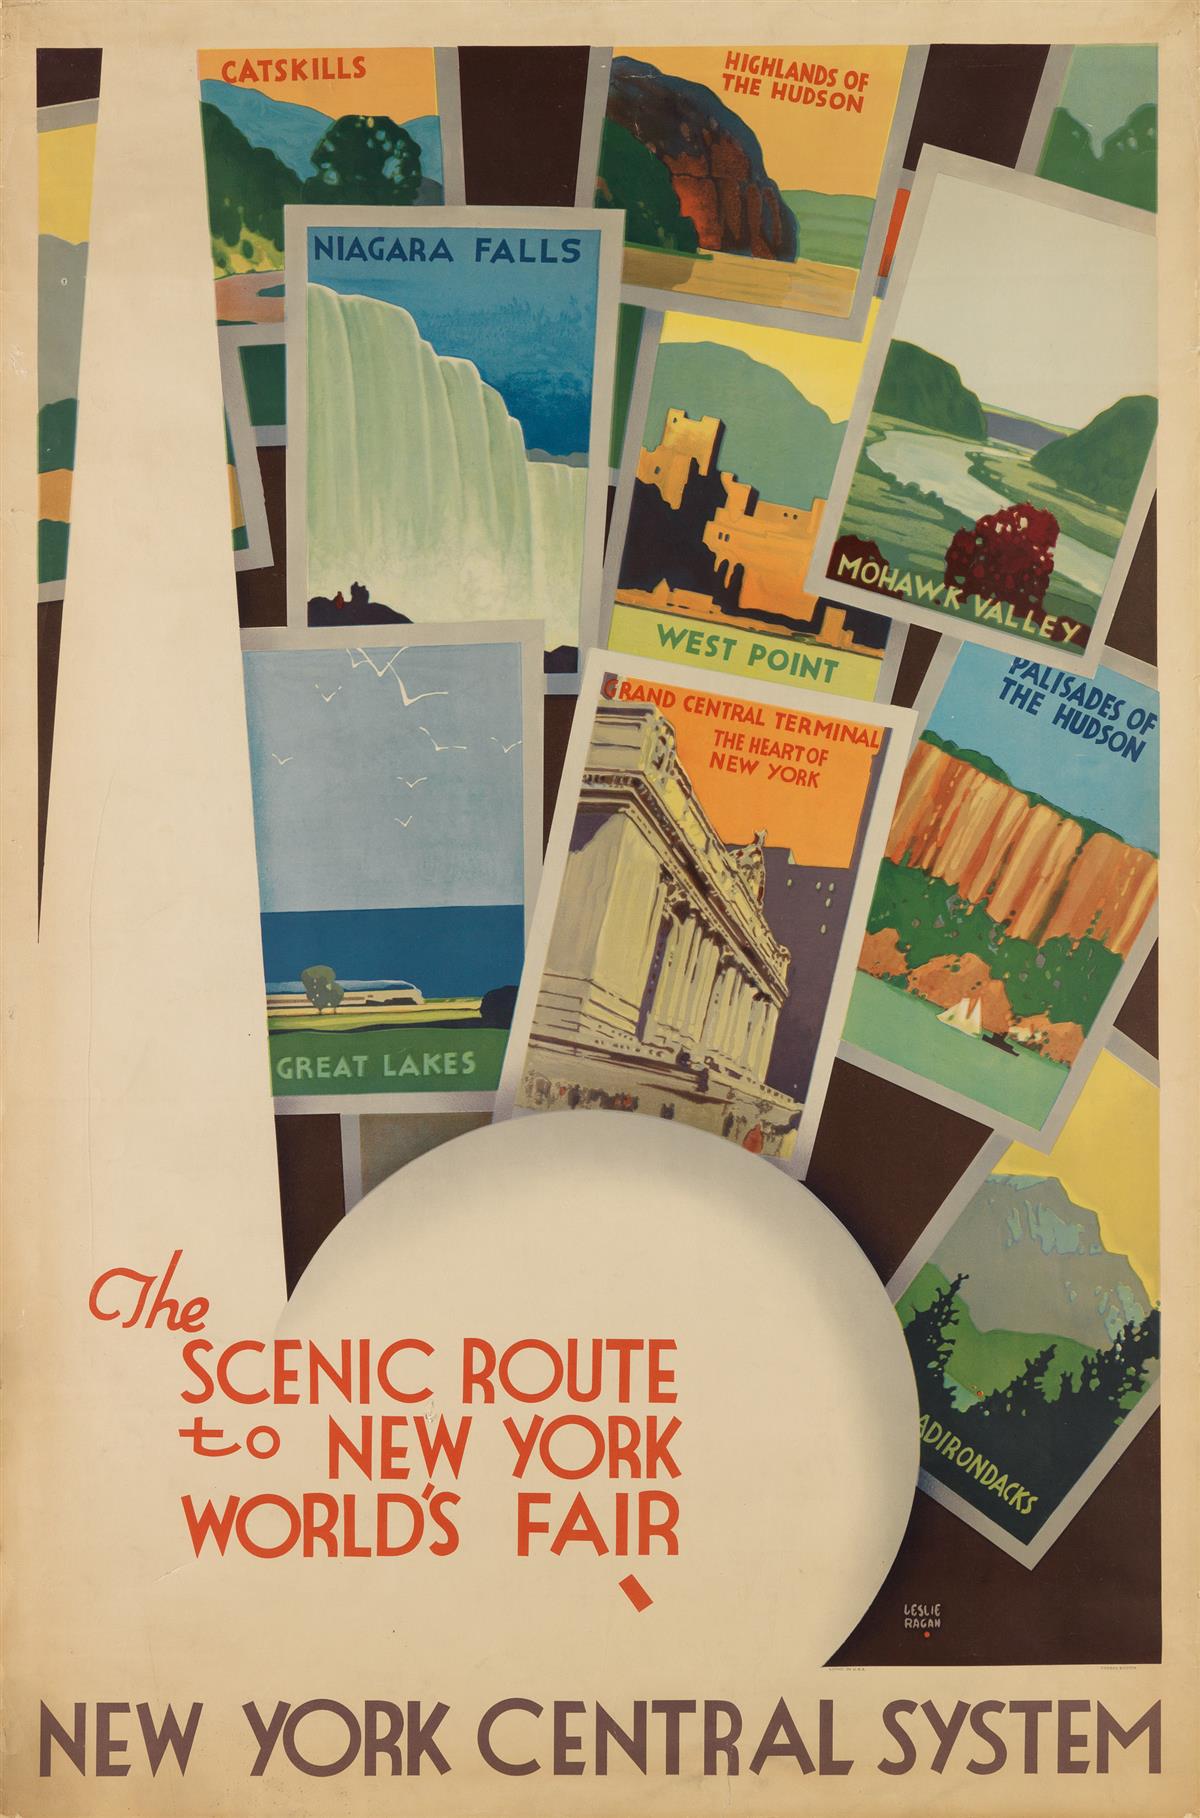 LESLIE RAGAN (1897-1972) The Scenic Route to New Yorks World Fair / New York Central System.